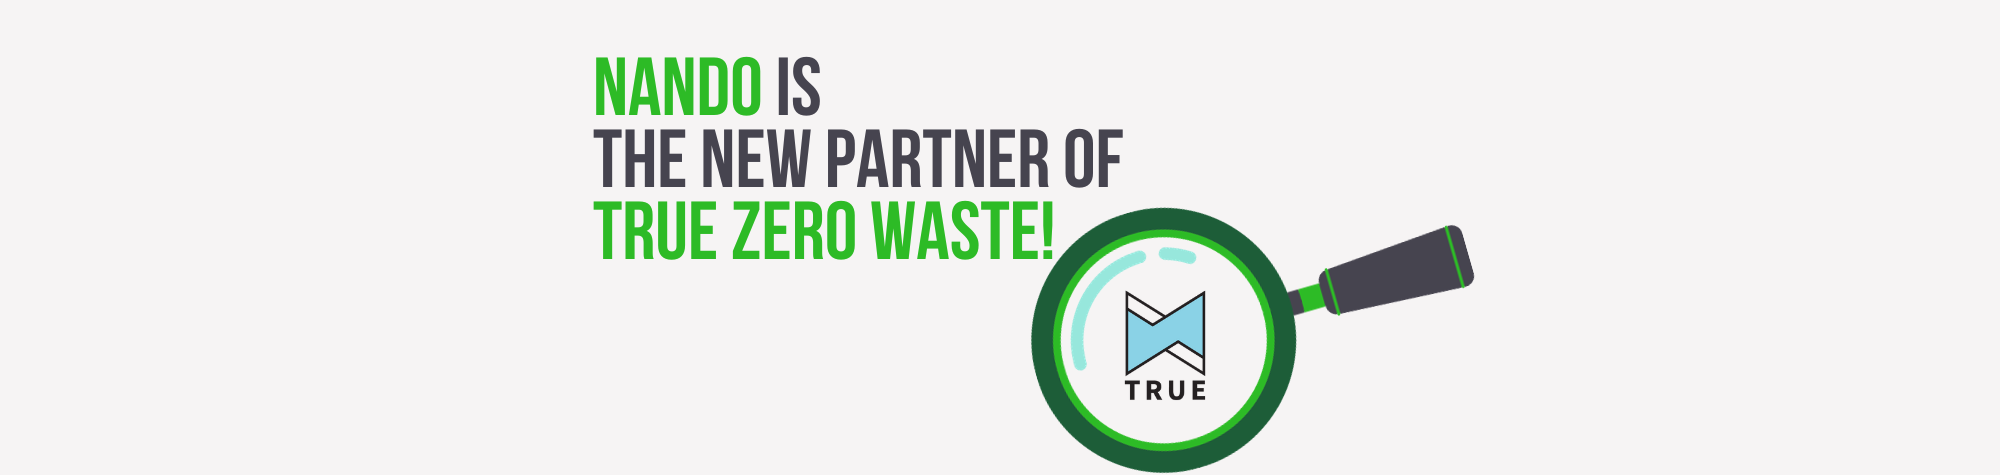 NANDO is in partnership with TRUE Certifiation for Zero Waste!